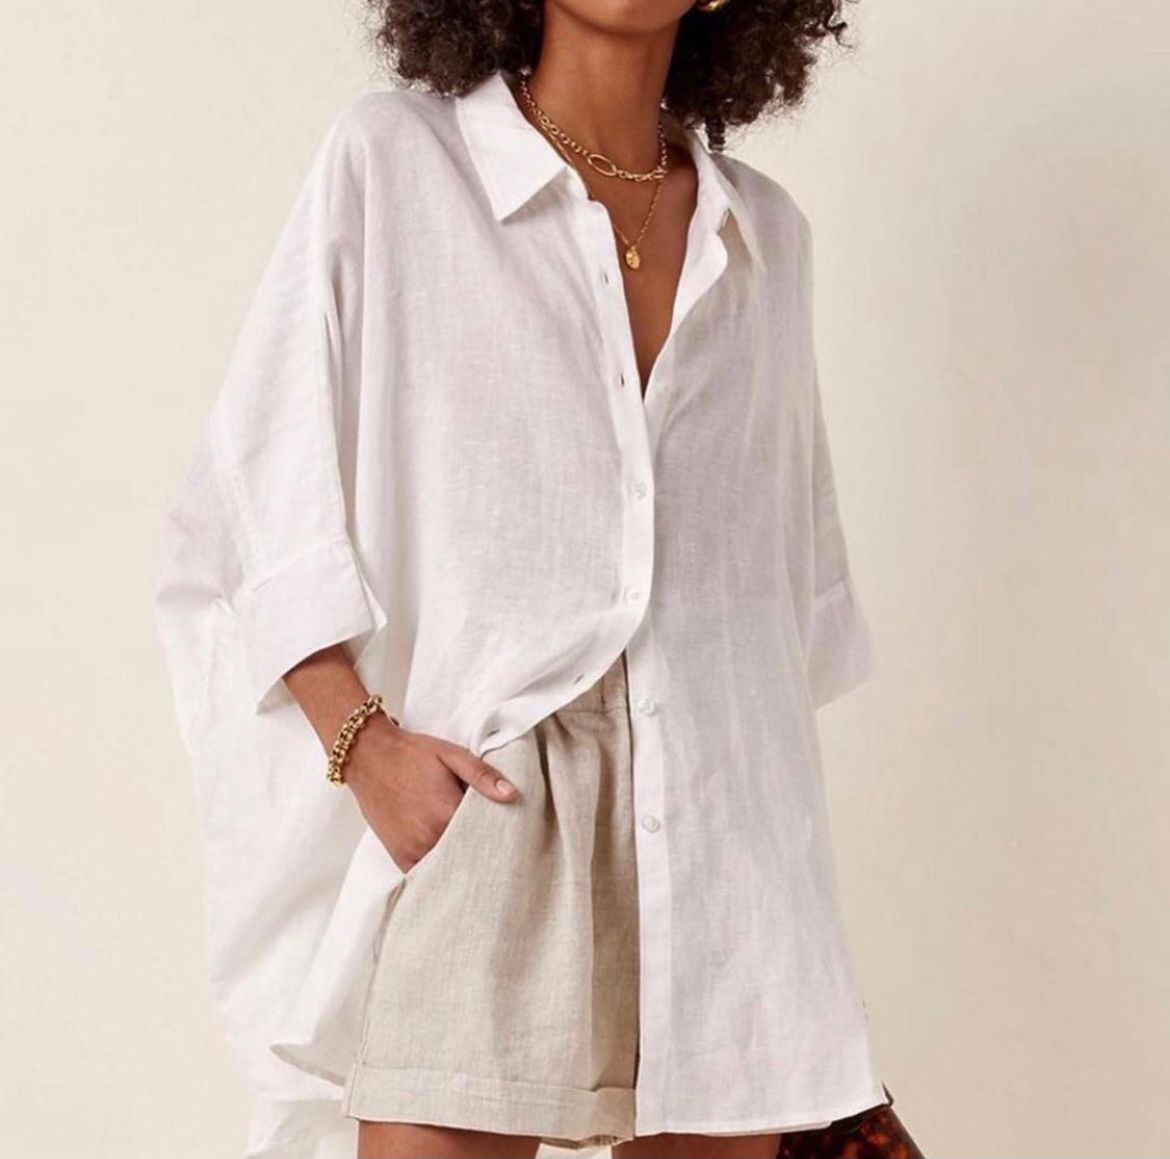 Oversized linen shirt with crop sleeves